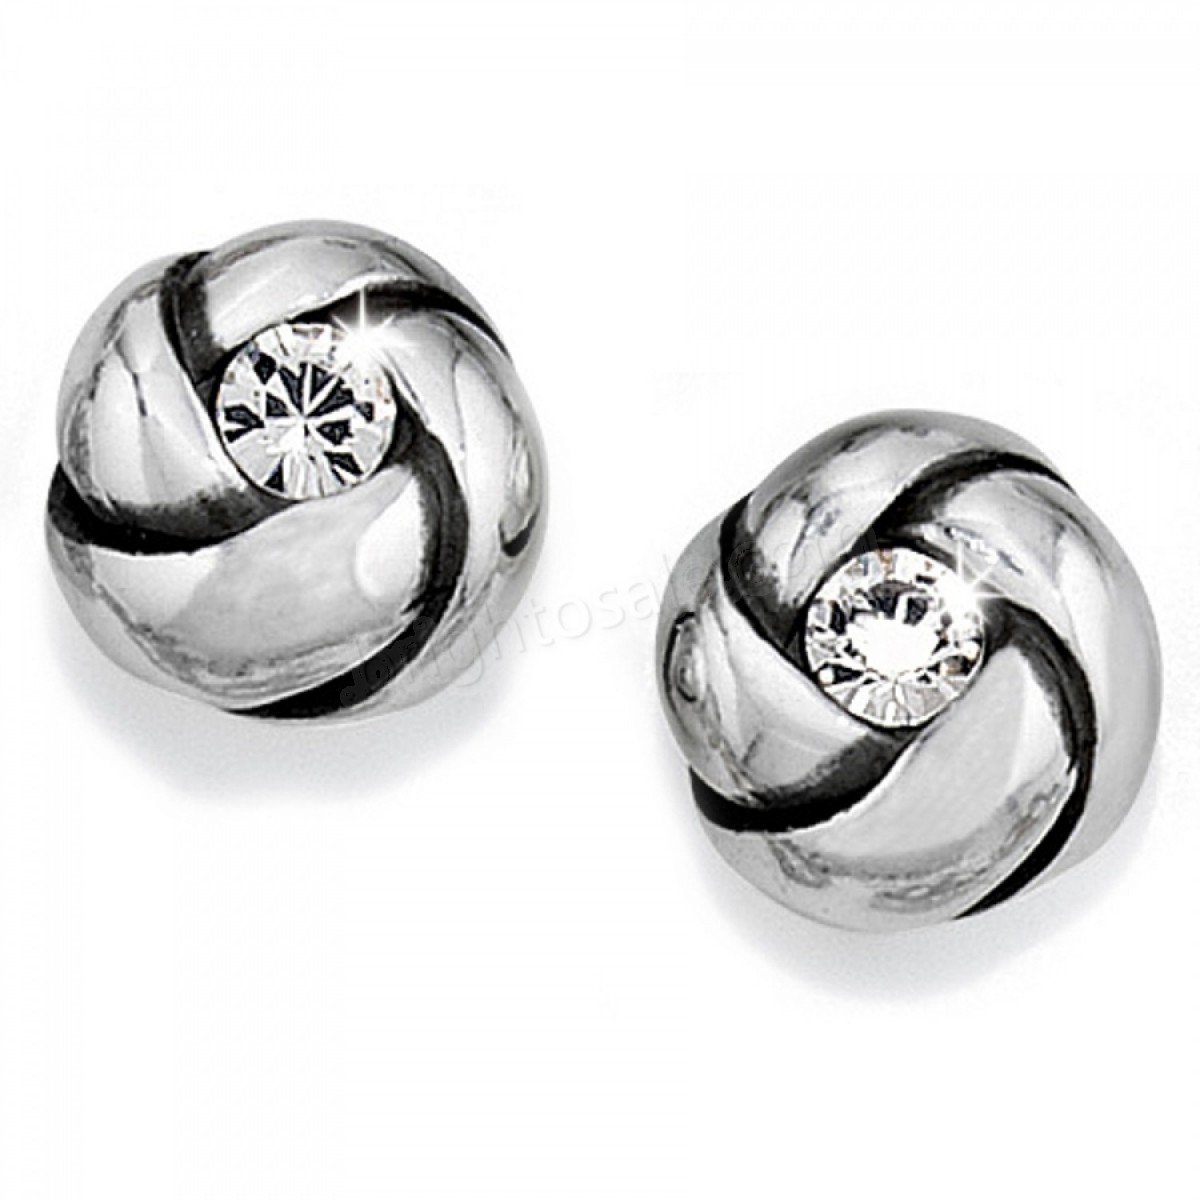 Brighton Collectibles & Online Discount Love Me Knot Mini Post Earrings - -0